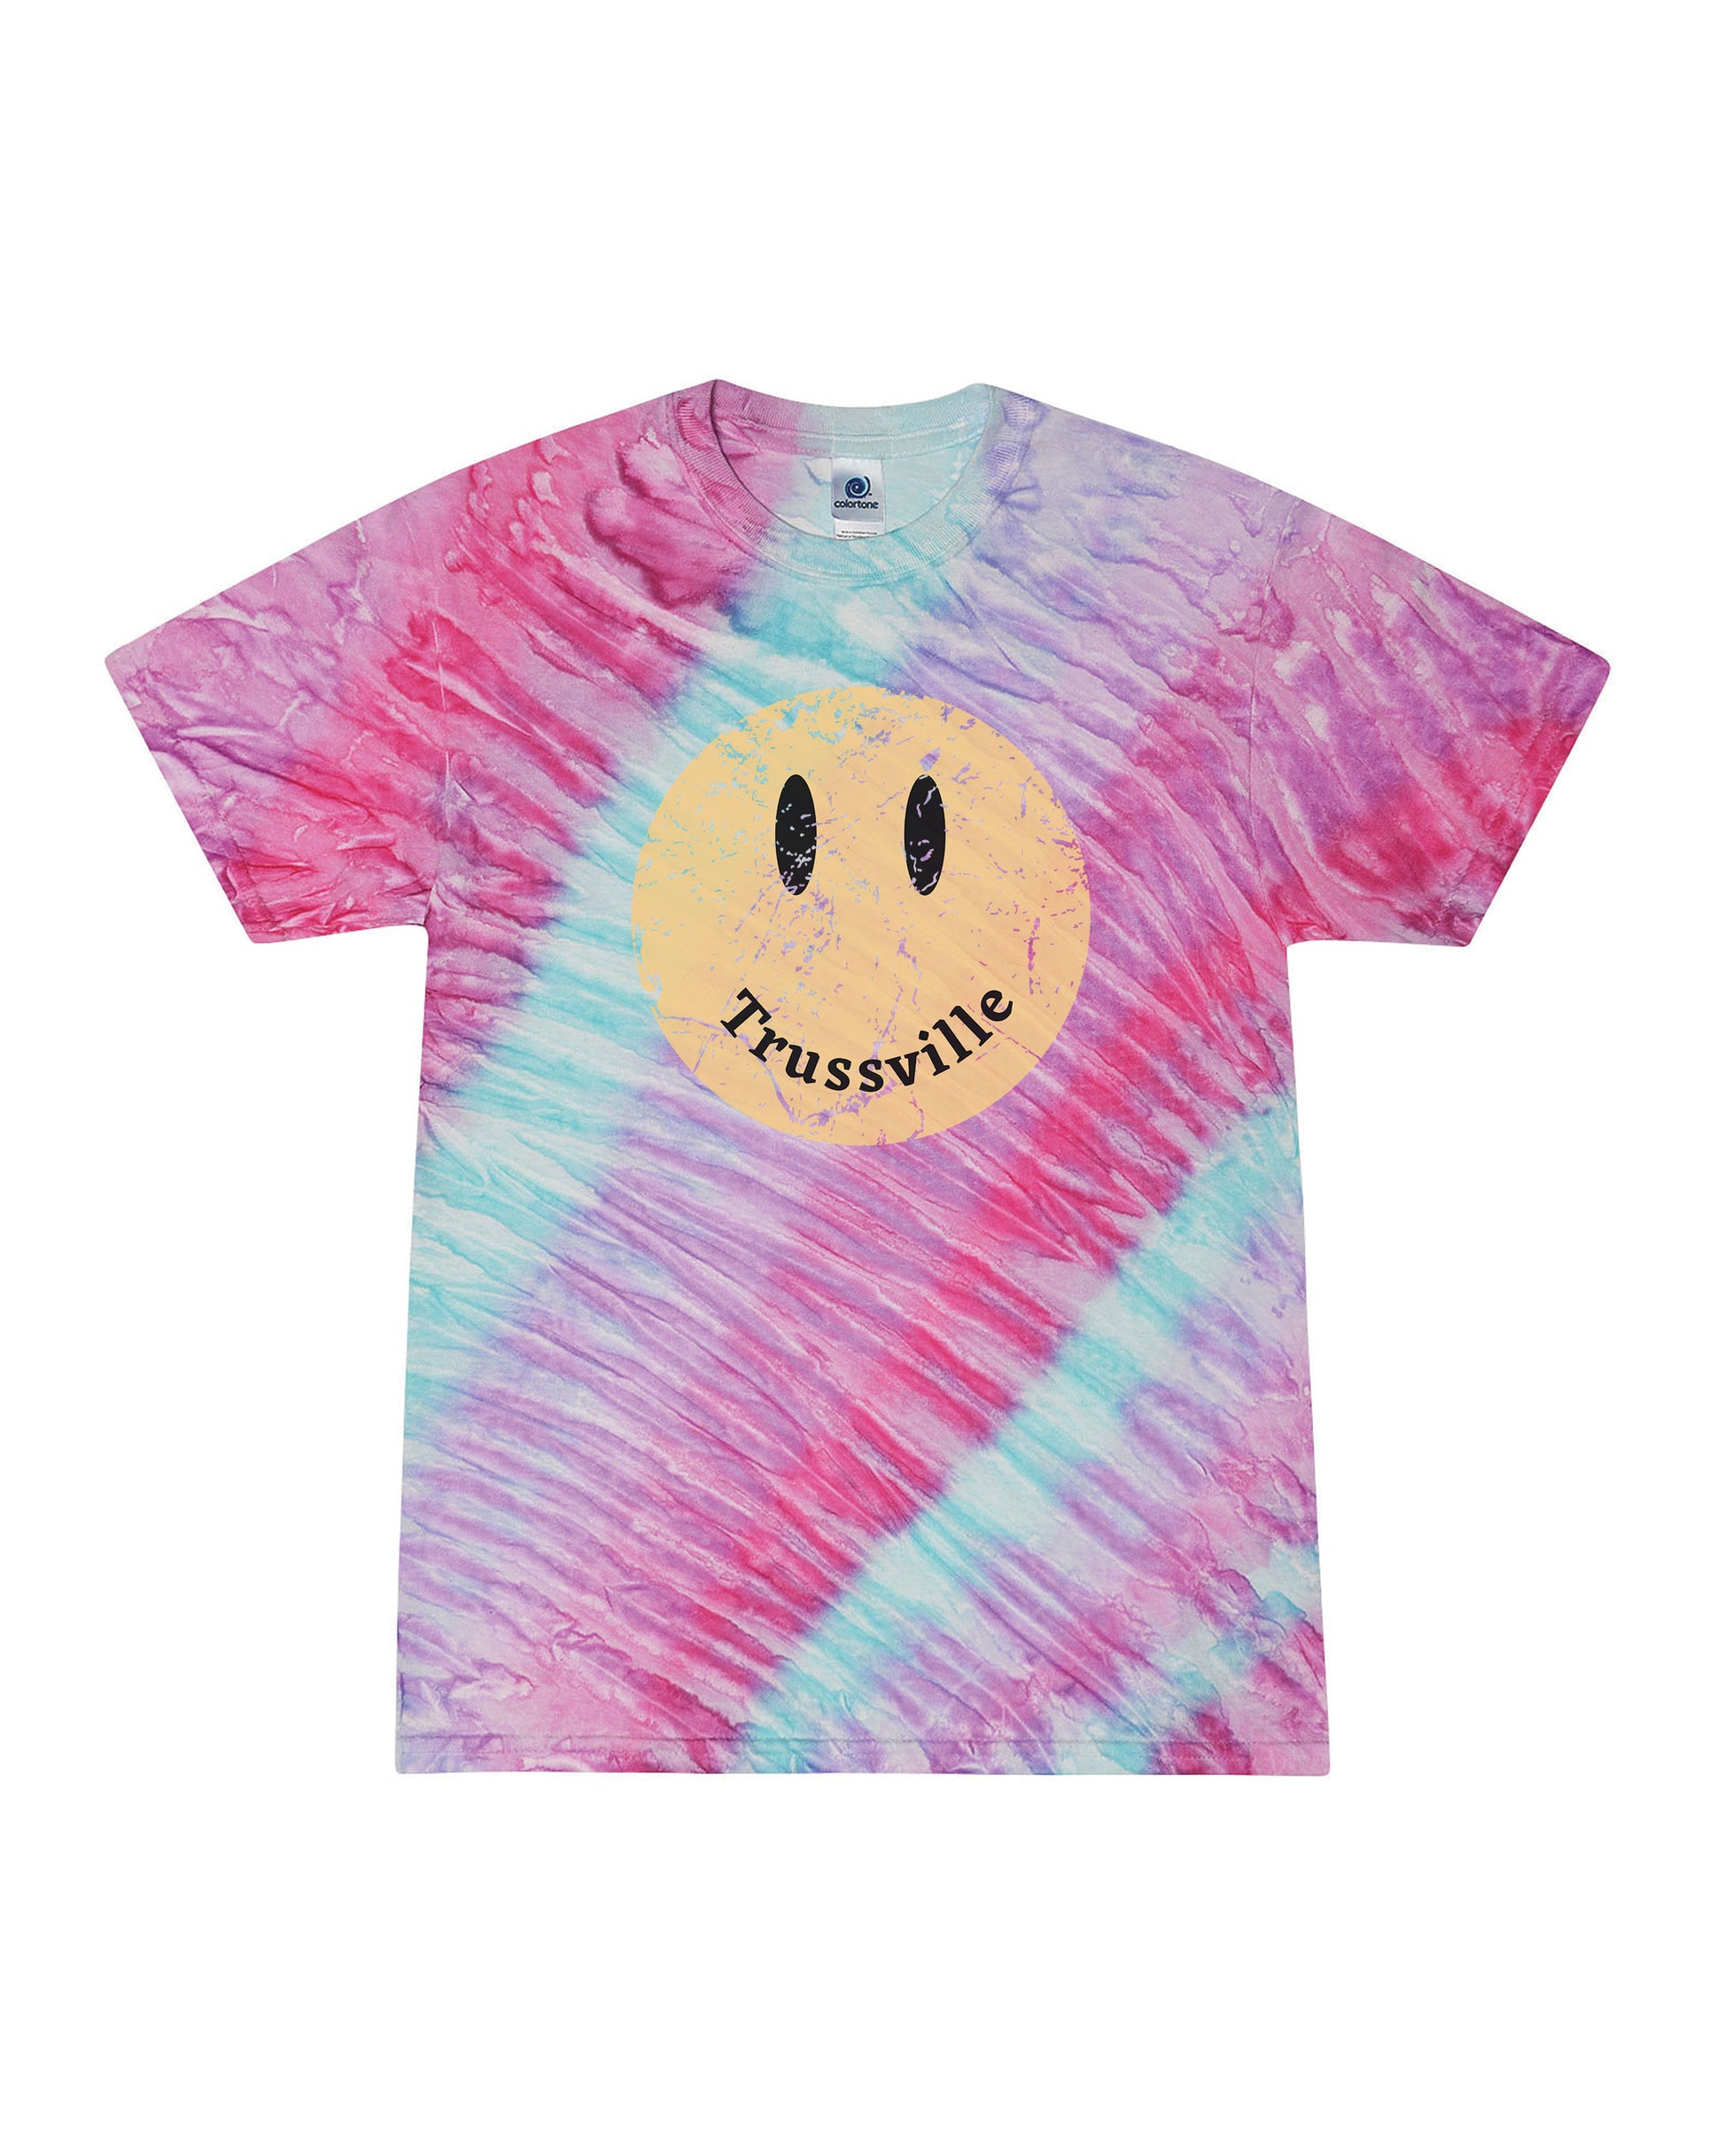 Tie Dye Trussville Happy Face | Tee | Kids-Sister Shirts-Sister Shirts, Cute & Custom Tees for Mama & Littles in Trussville, Alabama.